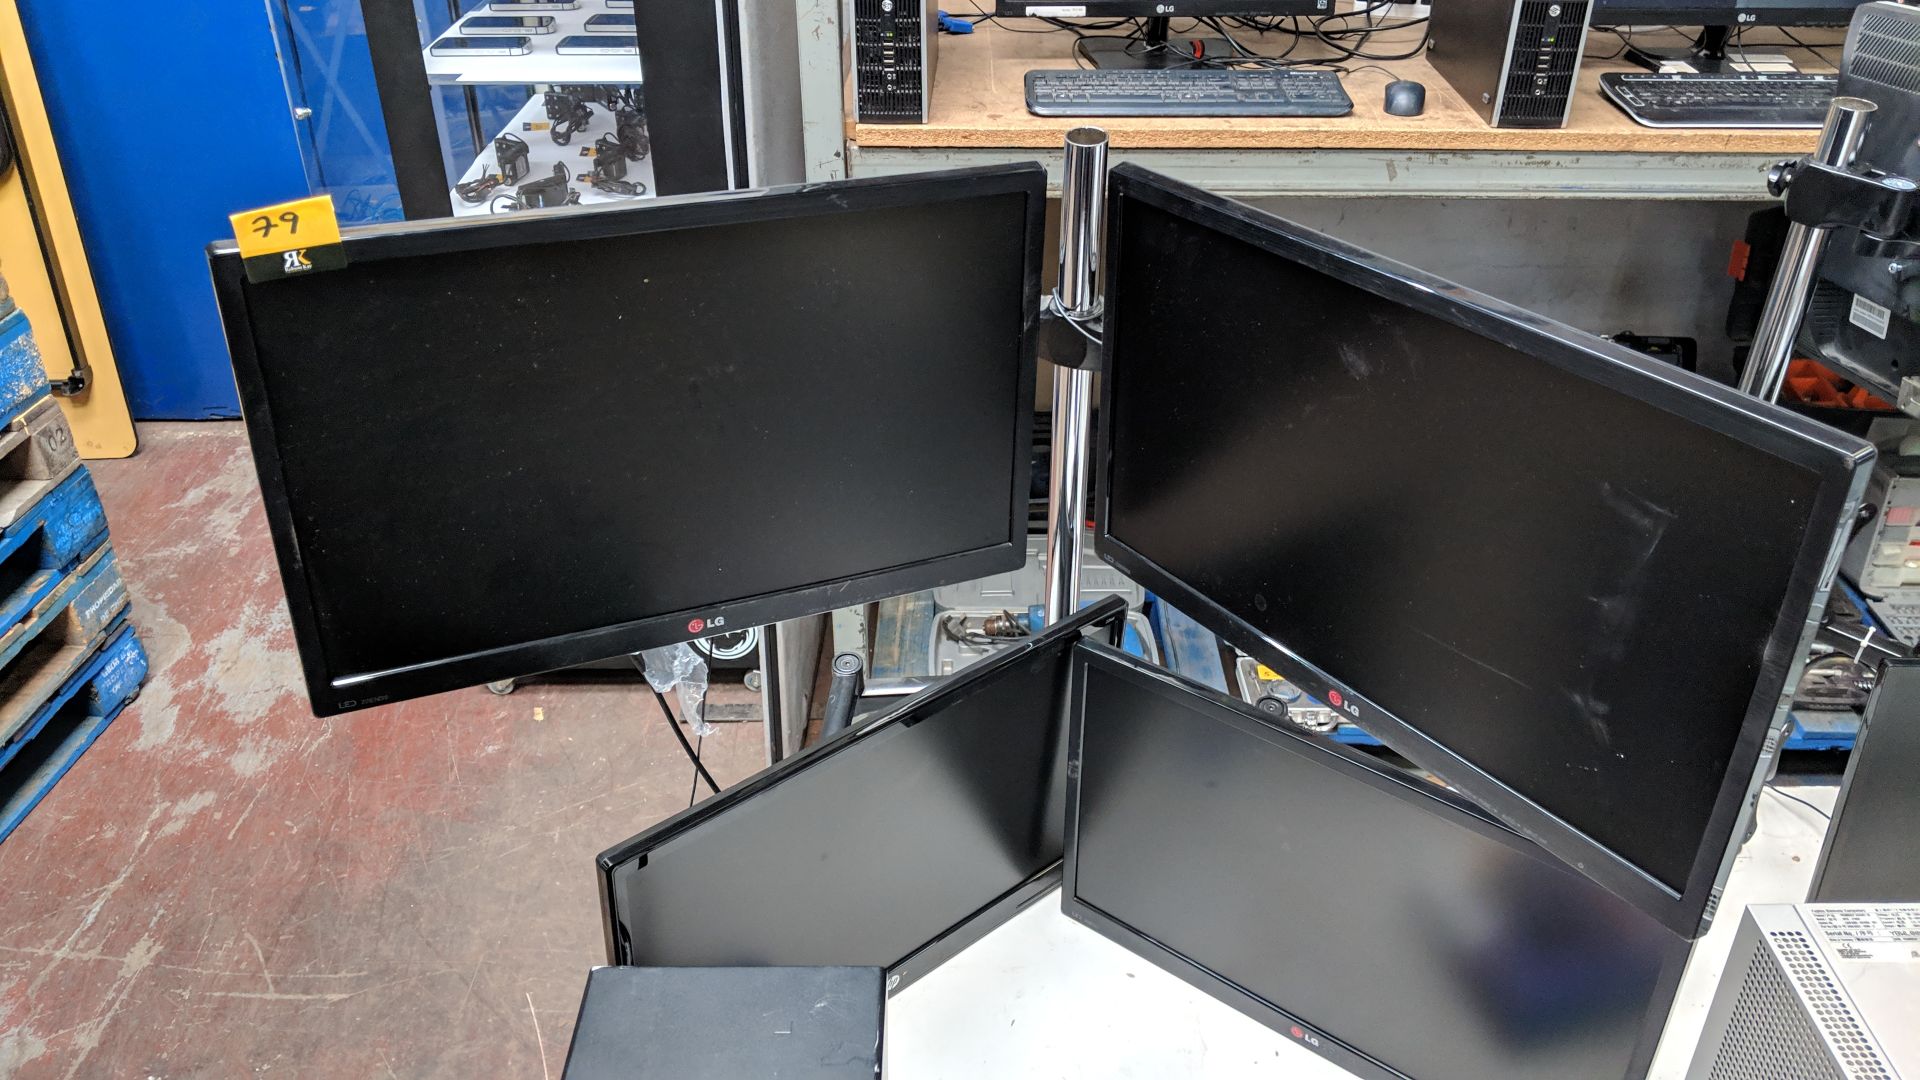 Quad monitor system comprising desk clamp/stand & 4 off assorted 22" widescreen monitors - Image 2 of 10